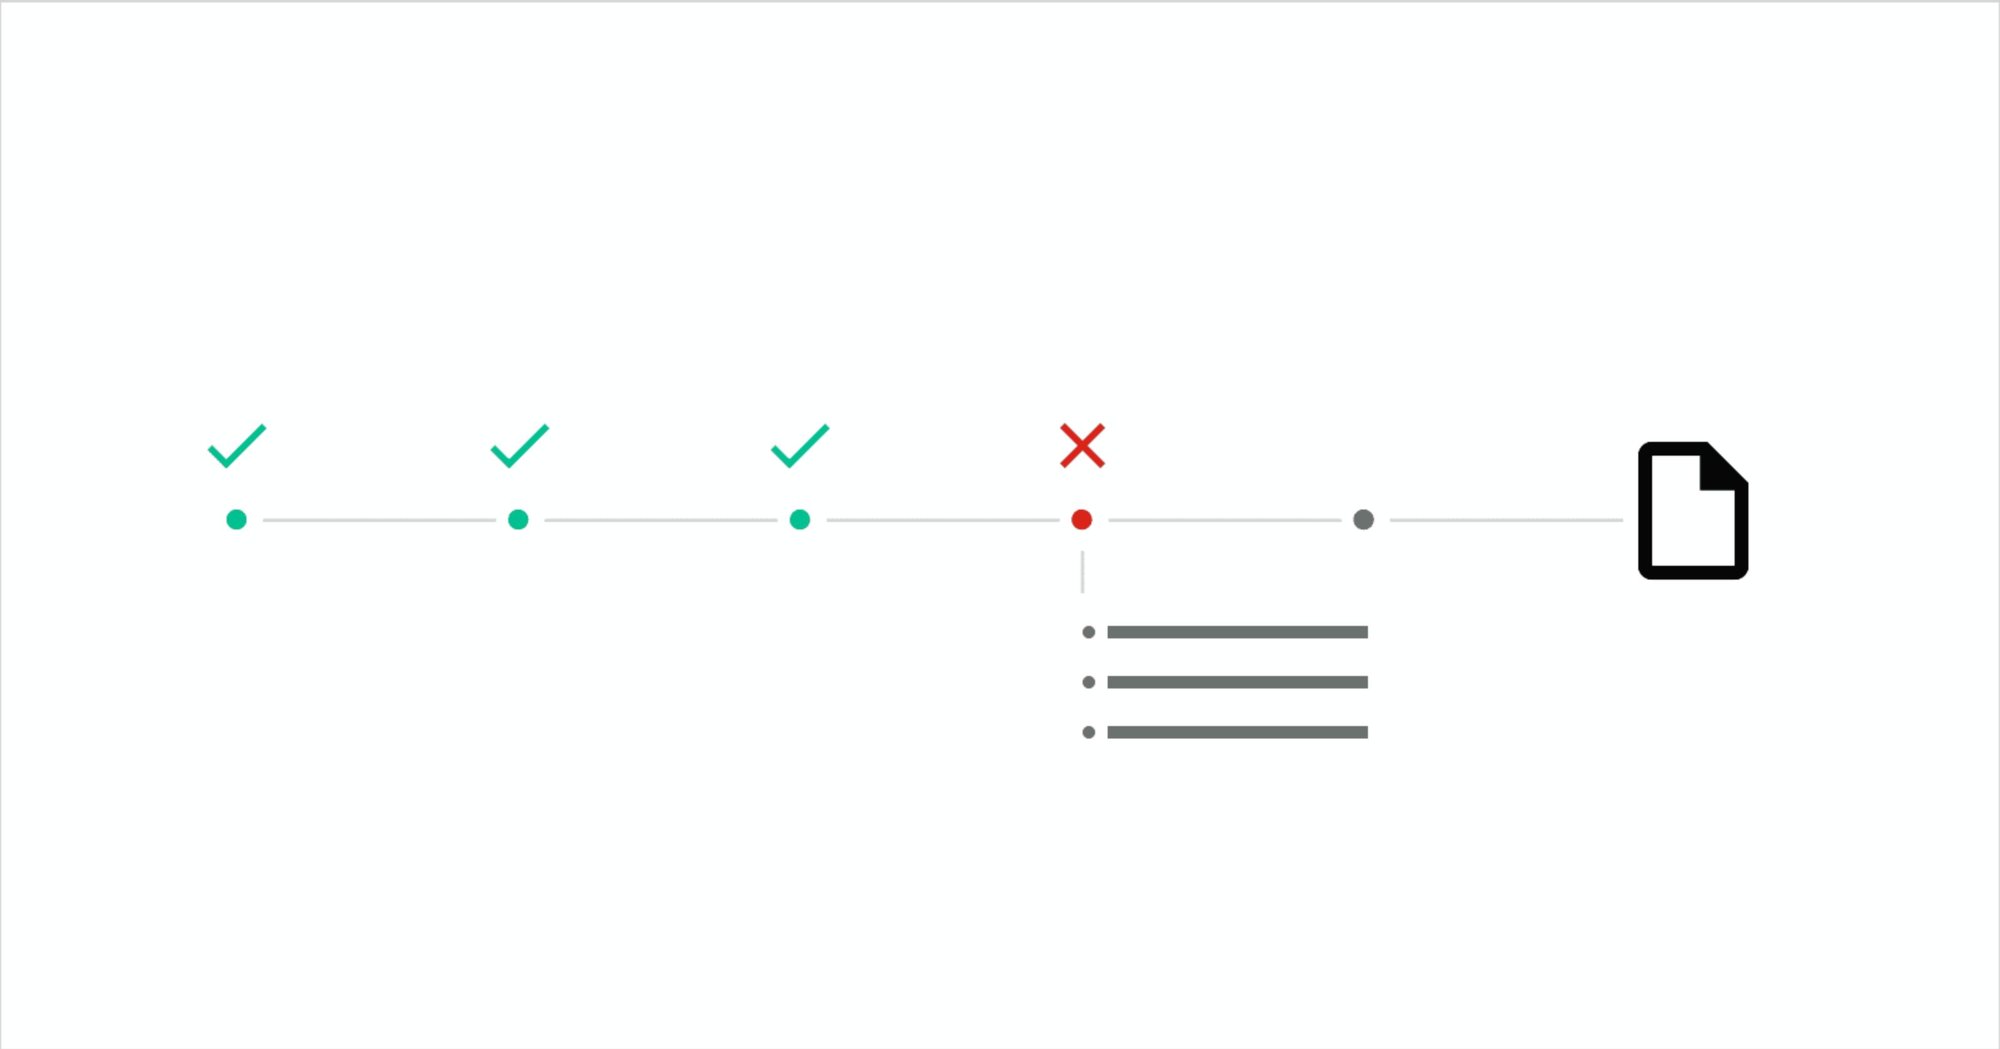 Image of the Loan Application Process with Three Green Checkmarks and a Red X Before the Final Loan Approval Stage